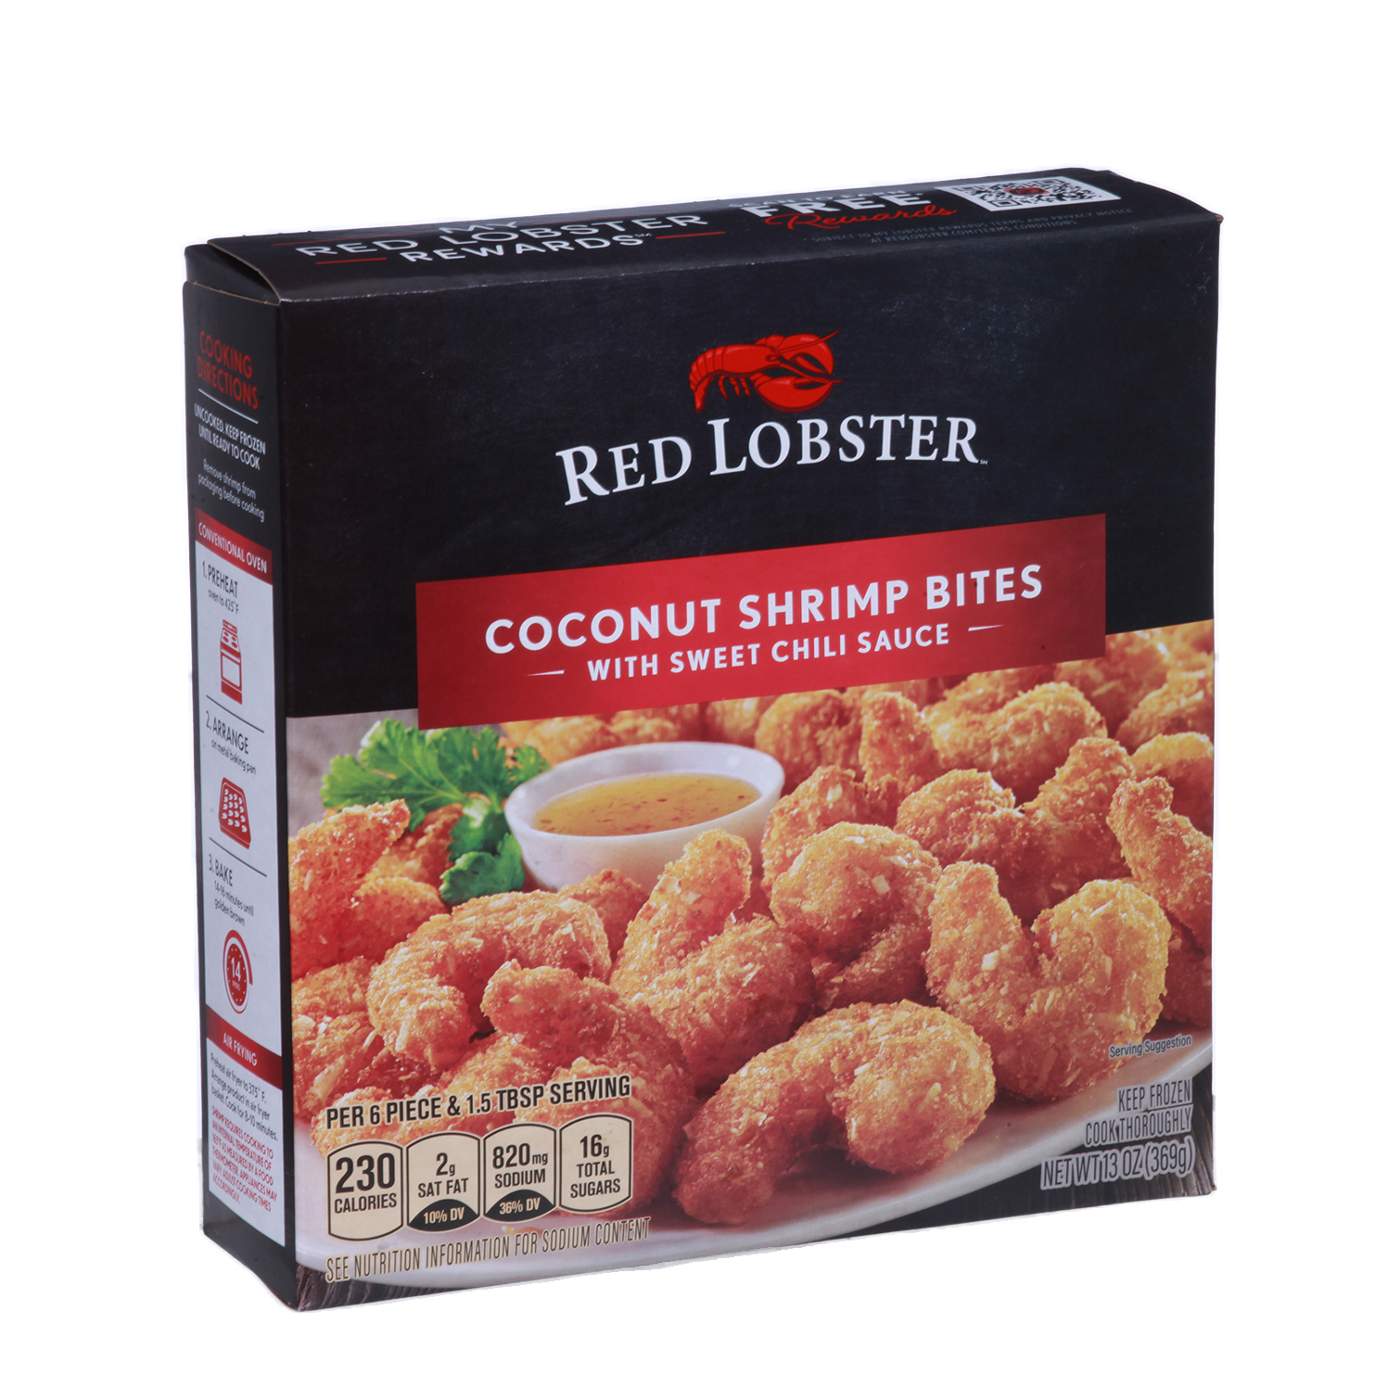 Red Lobster Frozen Coconut Shrimp Bites with Sweet Chili Sauce; image 2 of 2